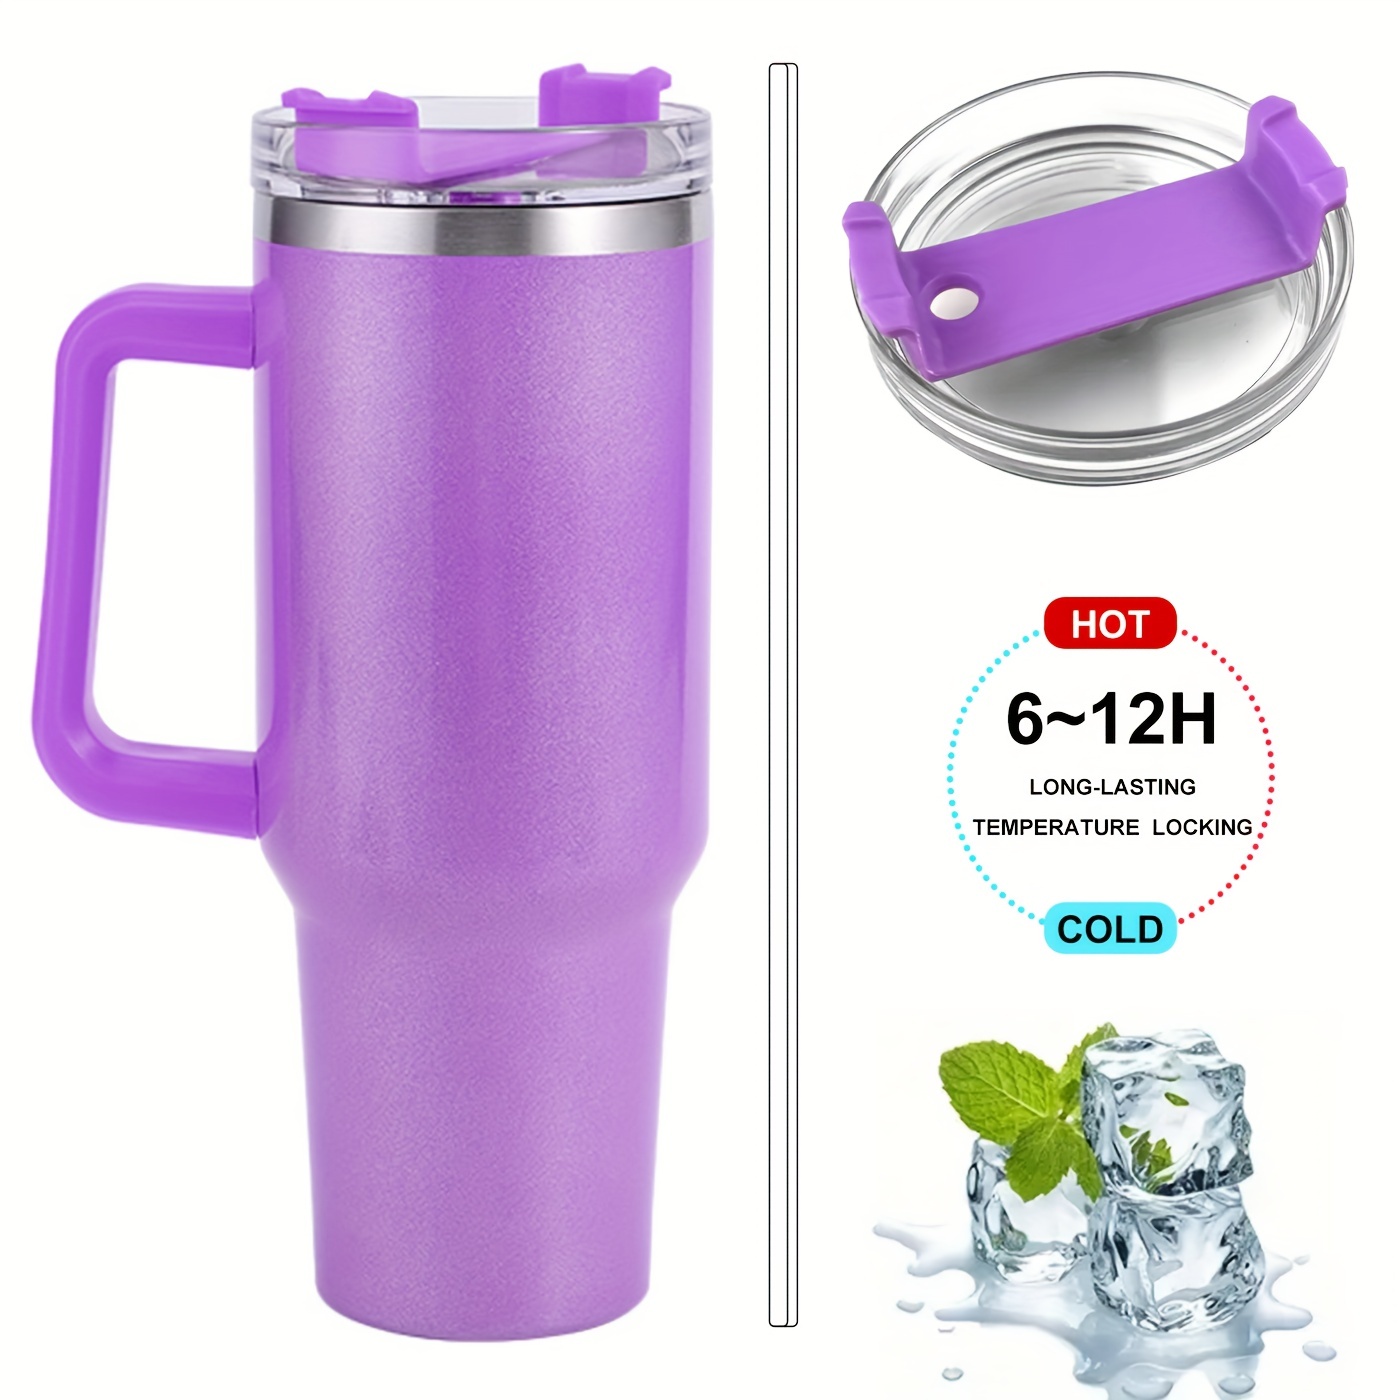 1pc Handle Stainless Steel Insulated Travel Mug With Straw, Can Be Used For  Car, Available In Black, Pink, Gray, Green, White, Purple Colors - Black